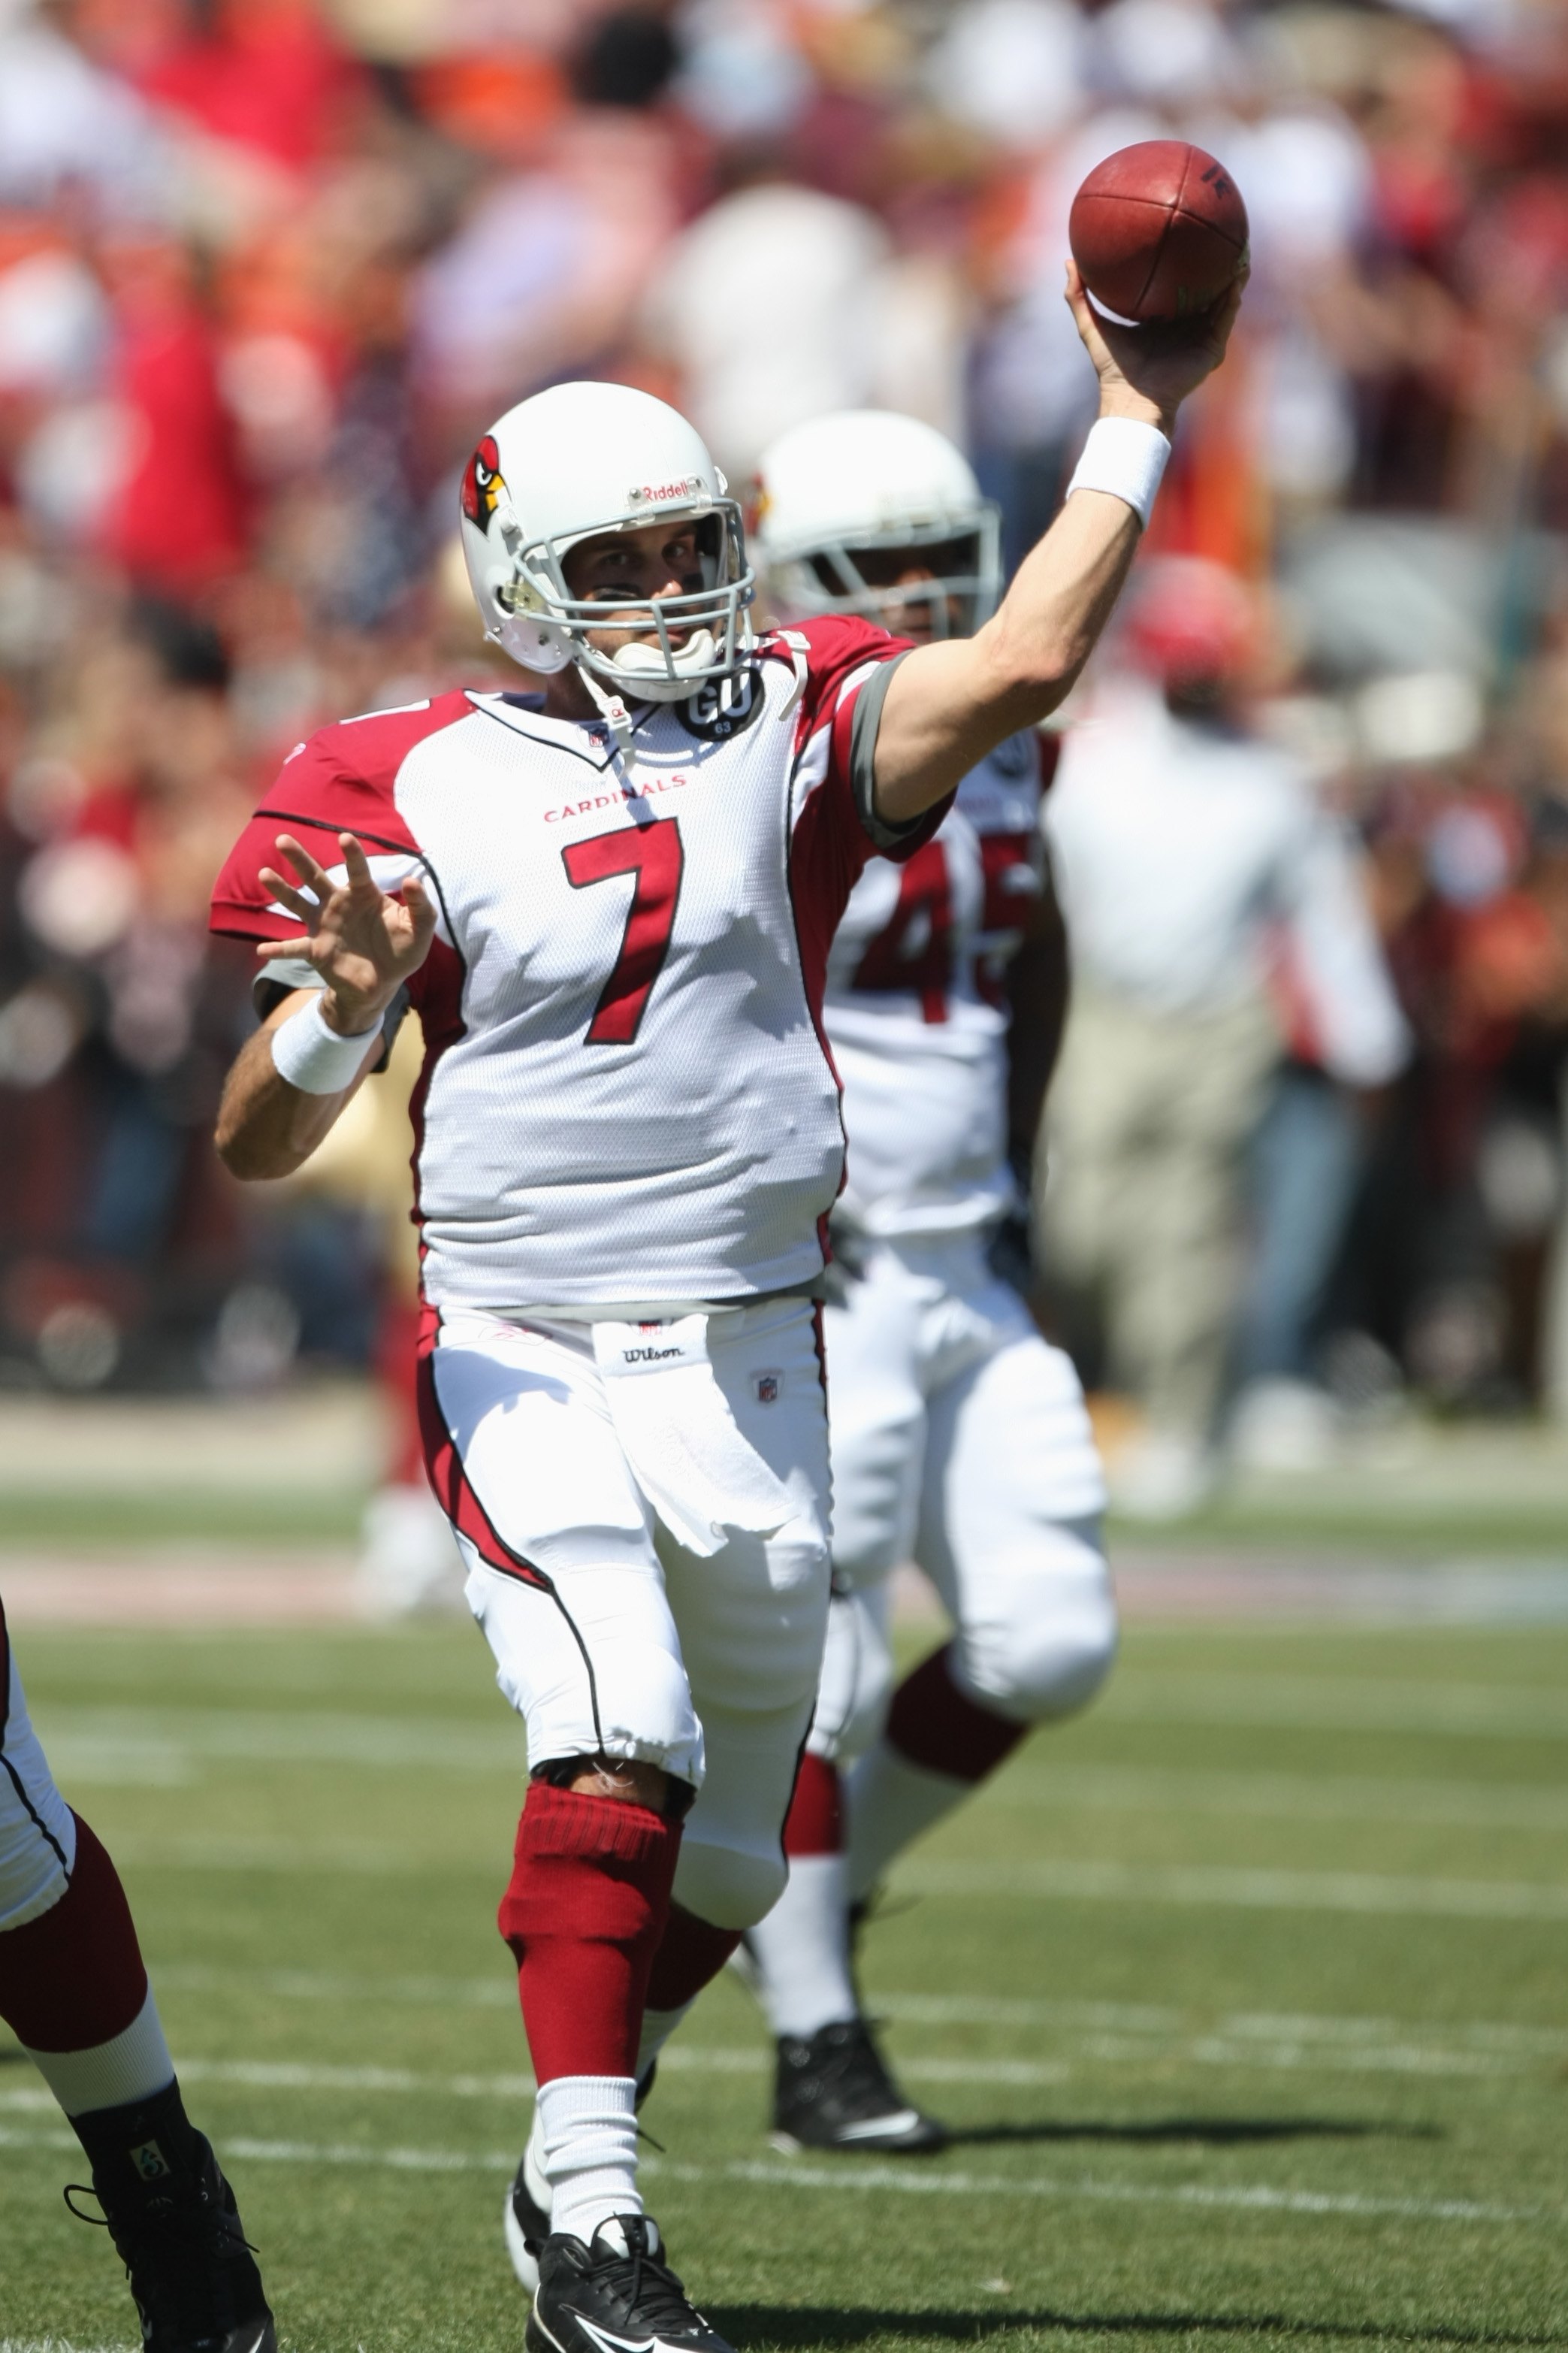 SAN FRANCISCO - SEPTEMBER 7:  Matt Leinart #7 of the Arizona Cardinals warms up before the game against the San Francisco 49ers on September 7, 2008 at Bill Walsh Field at Candlestick Park in San Francisco, California. (Photo by Jed Jacobsohn/Getty Images